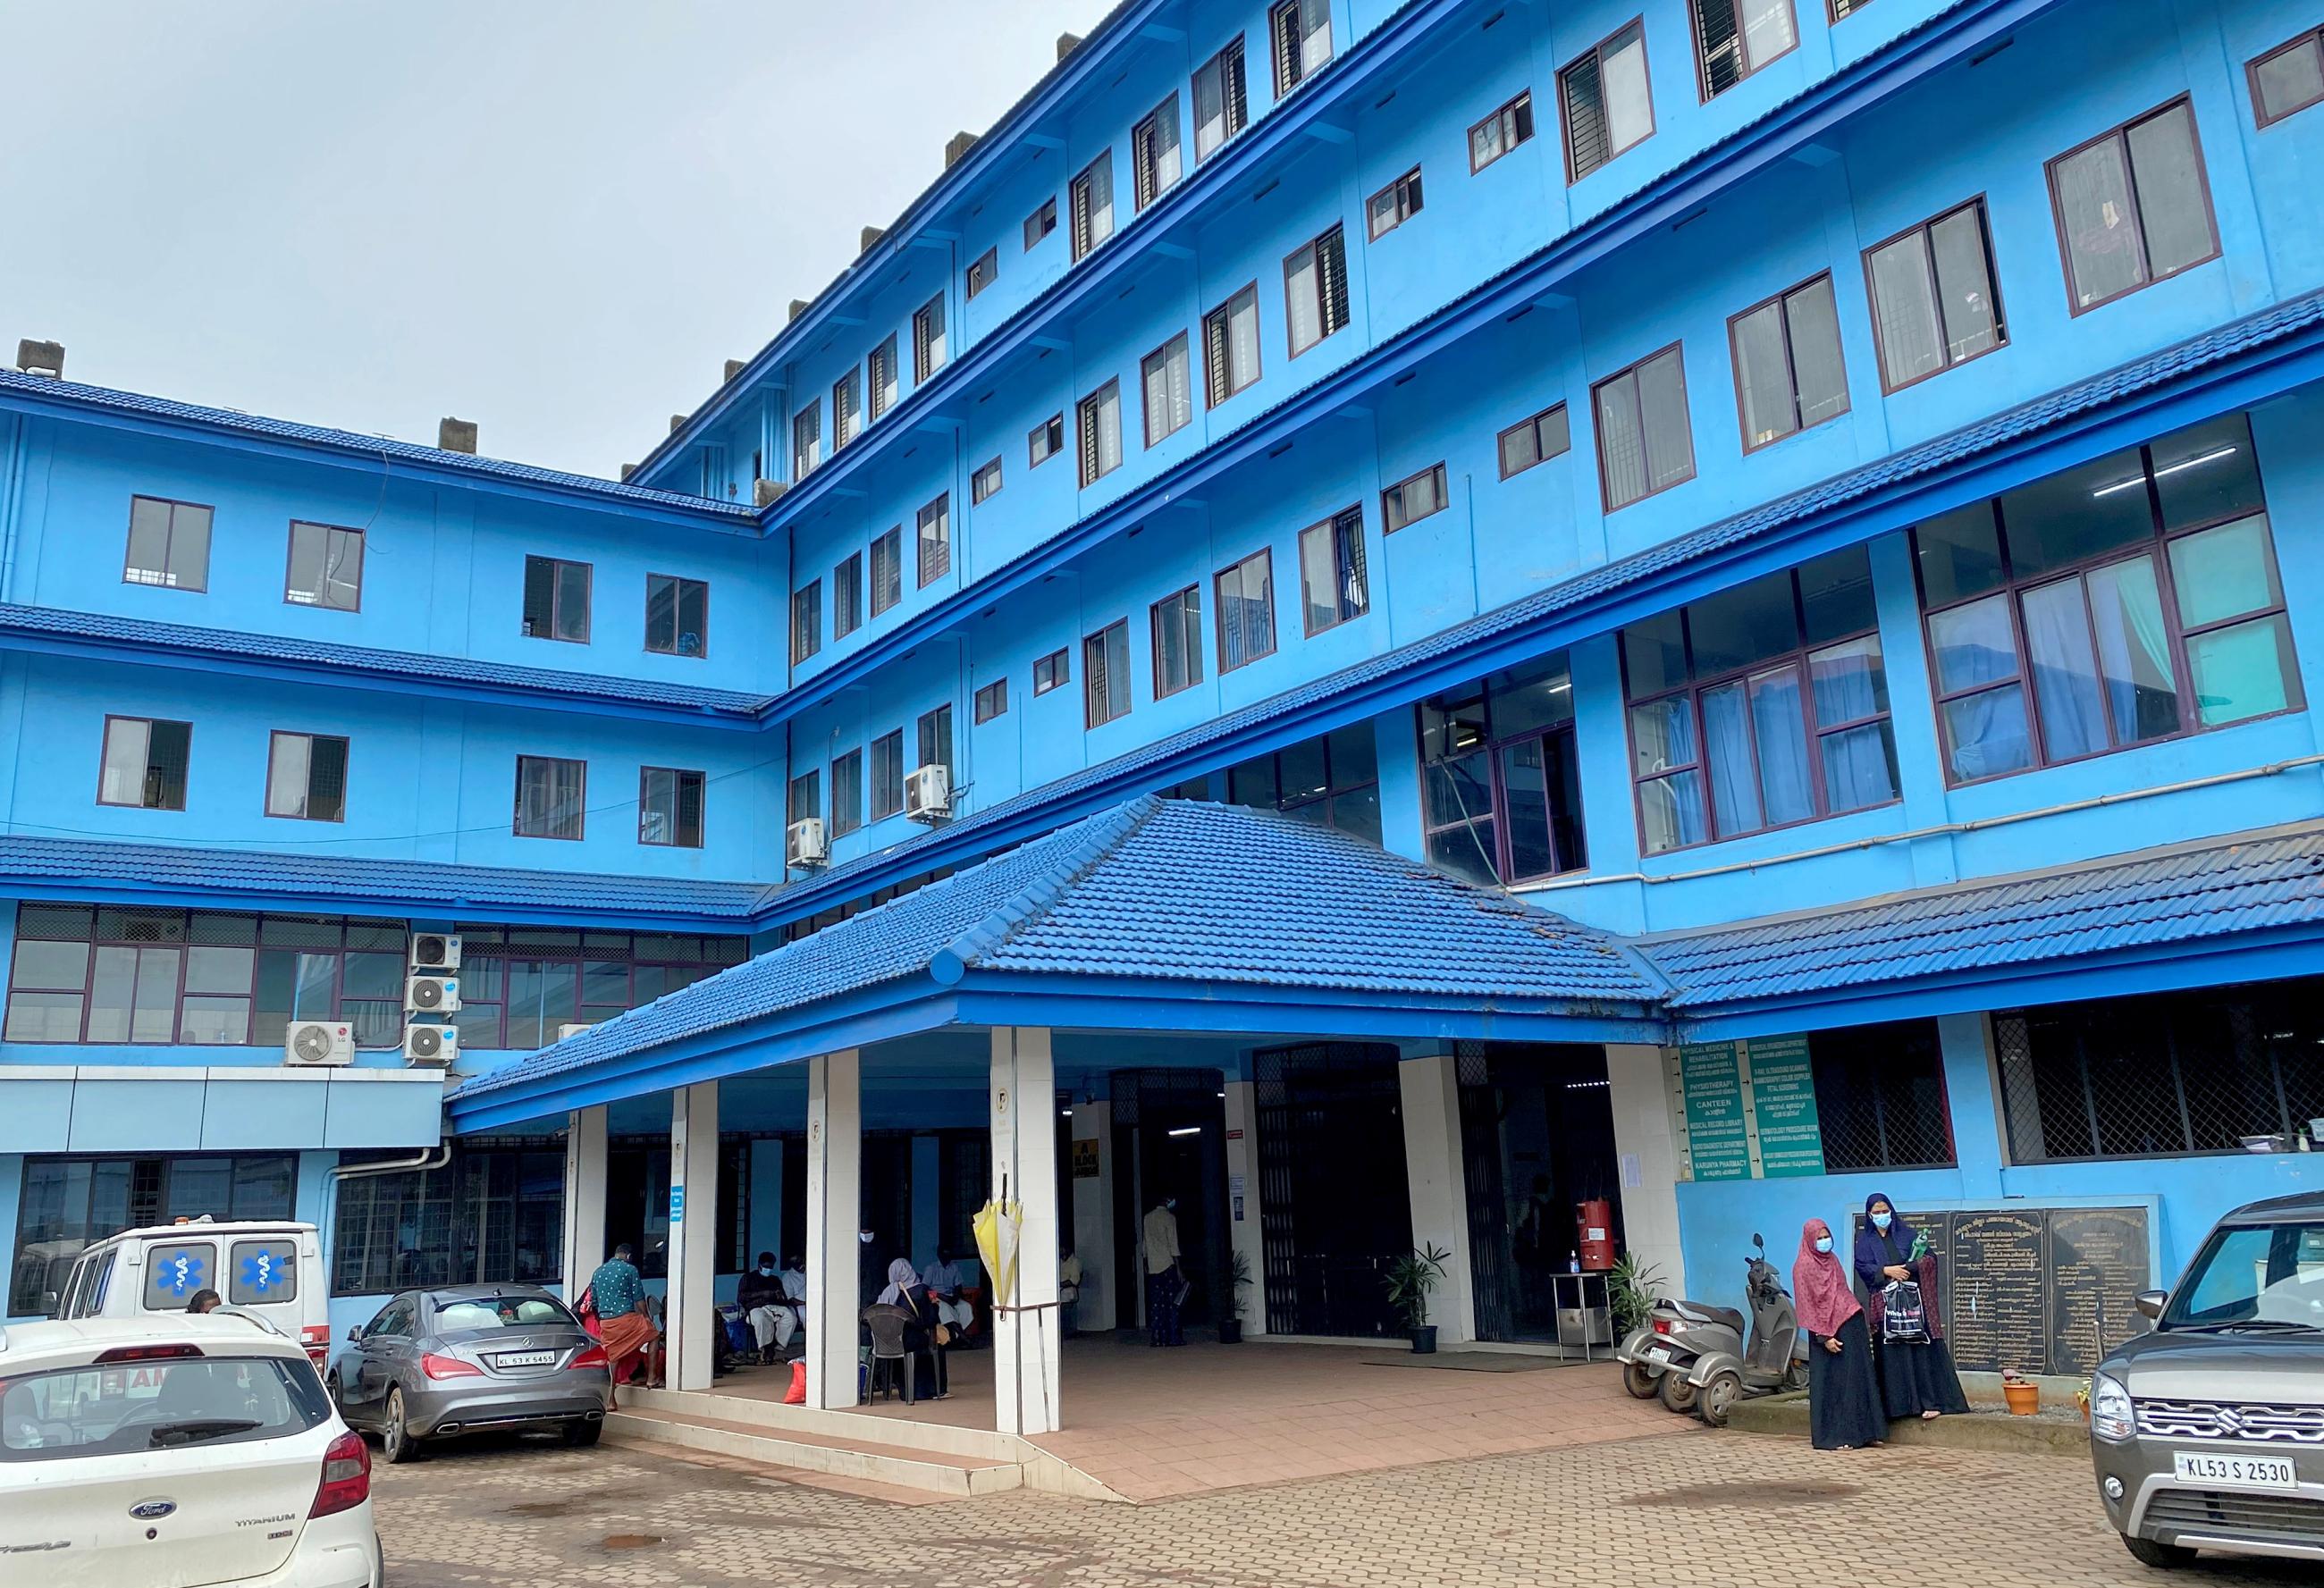 A general view of the Government Medical College Hospital in Manjeri, in the Malappuram district of the southern state of Kerala, India, on August 18, 2021.